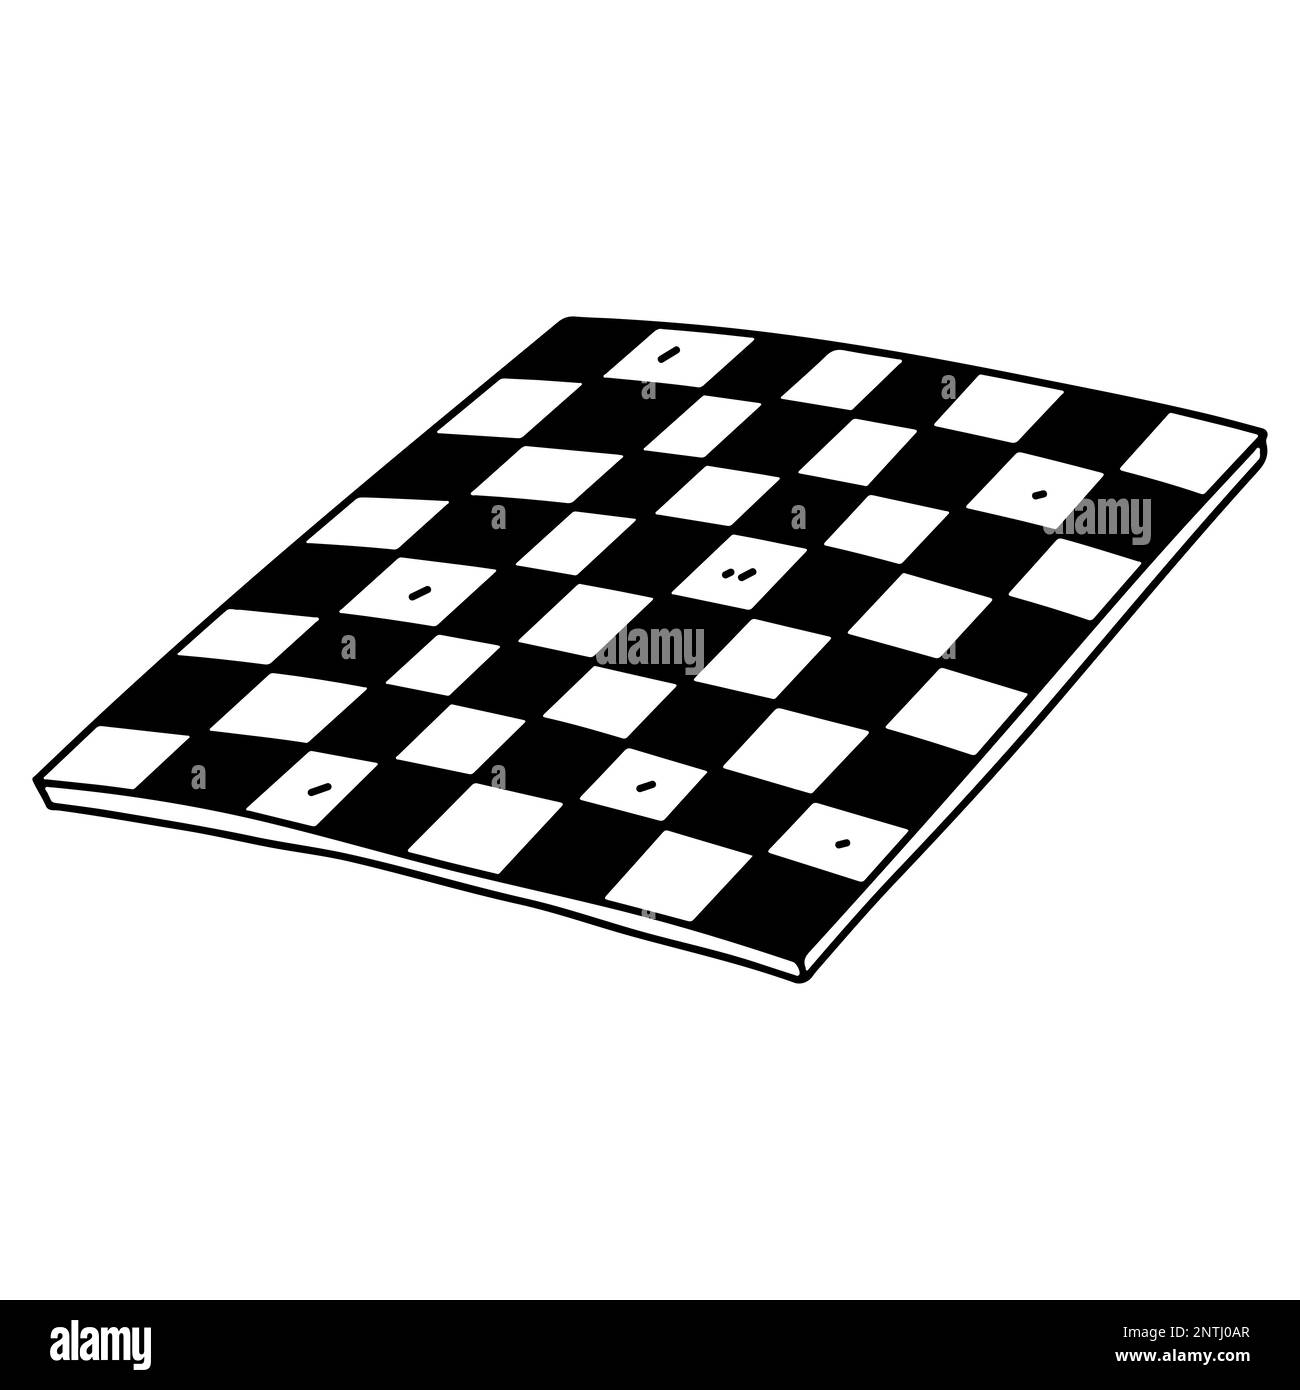 Empty chess board in hand drawn doodle style. Vector illustration isolated on white background. Stock Vector